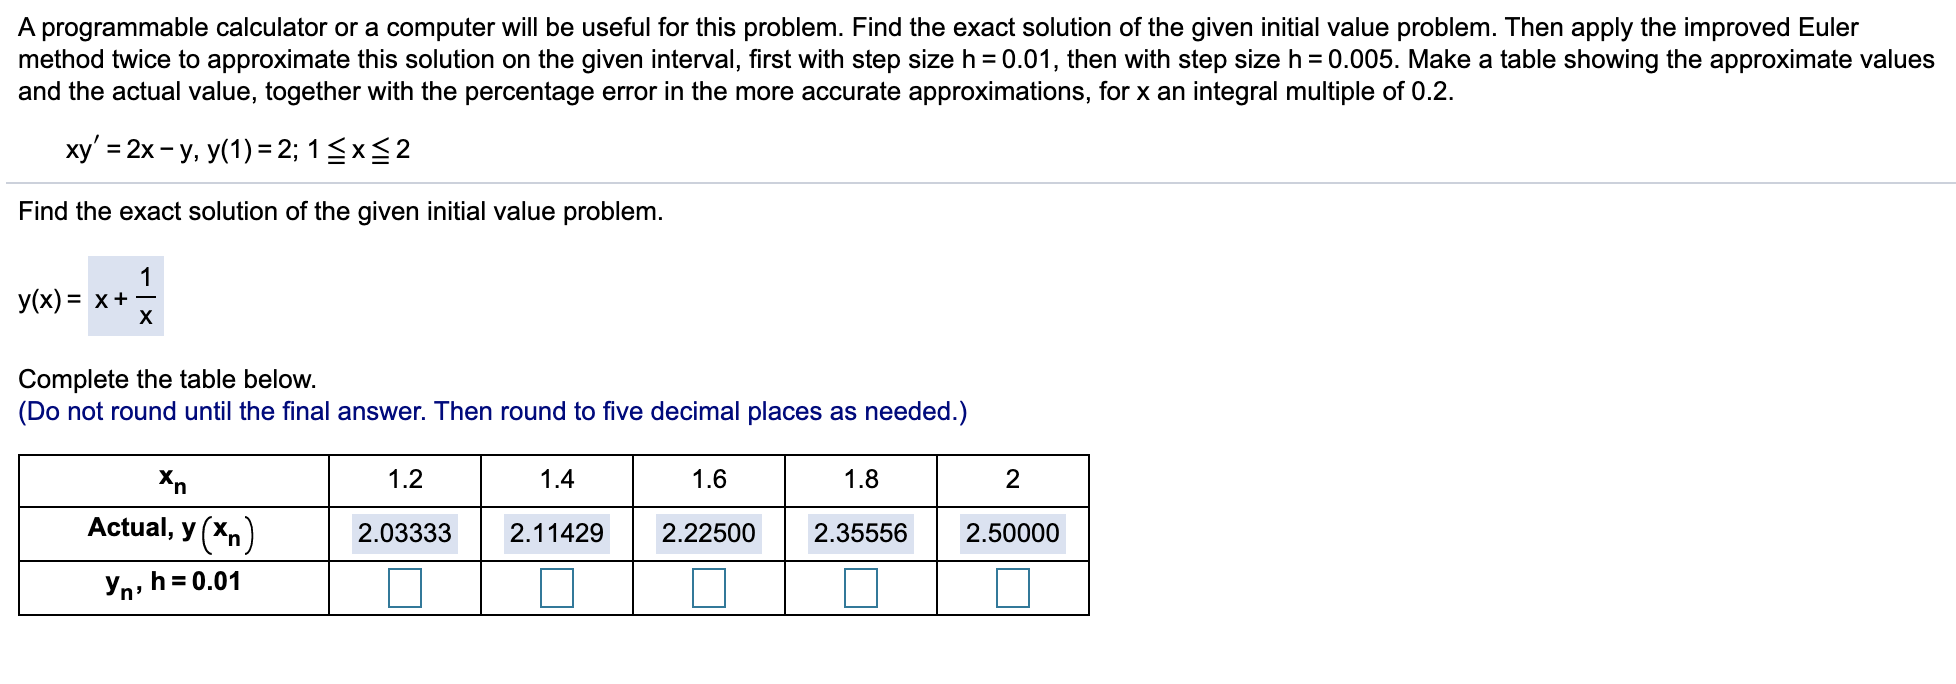 ху'%3 2х - у, у(1) -2; 15x$2
Find the exact solution of the given initial value problem.
1
-(x) = x +
X
Complete the table below.
Do not round until the final answer. Then round to five decimal places as needed.)
Xn
1.2
1.4
1.6
1.8
2
Actual, y (Xn)
2.22500
2.03333
2.11429
2.35556
2.50000
Yn, h=0.01
